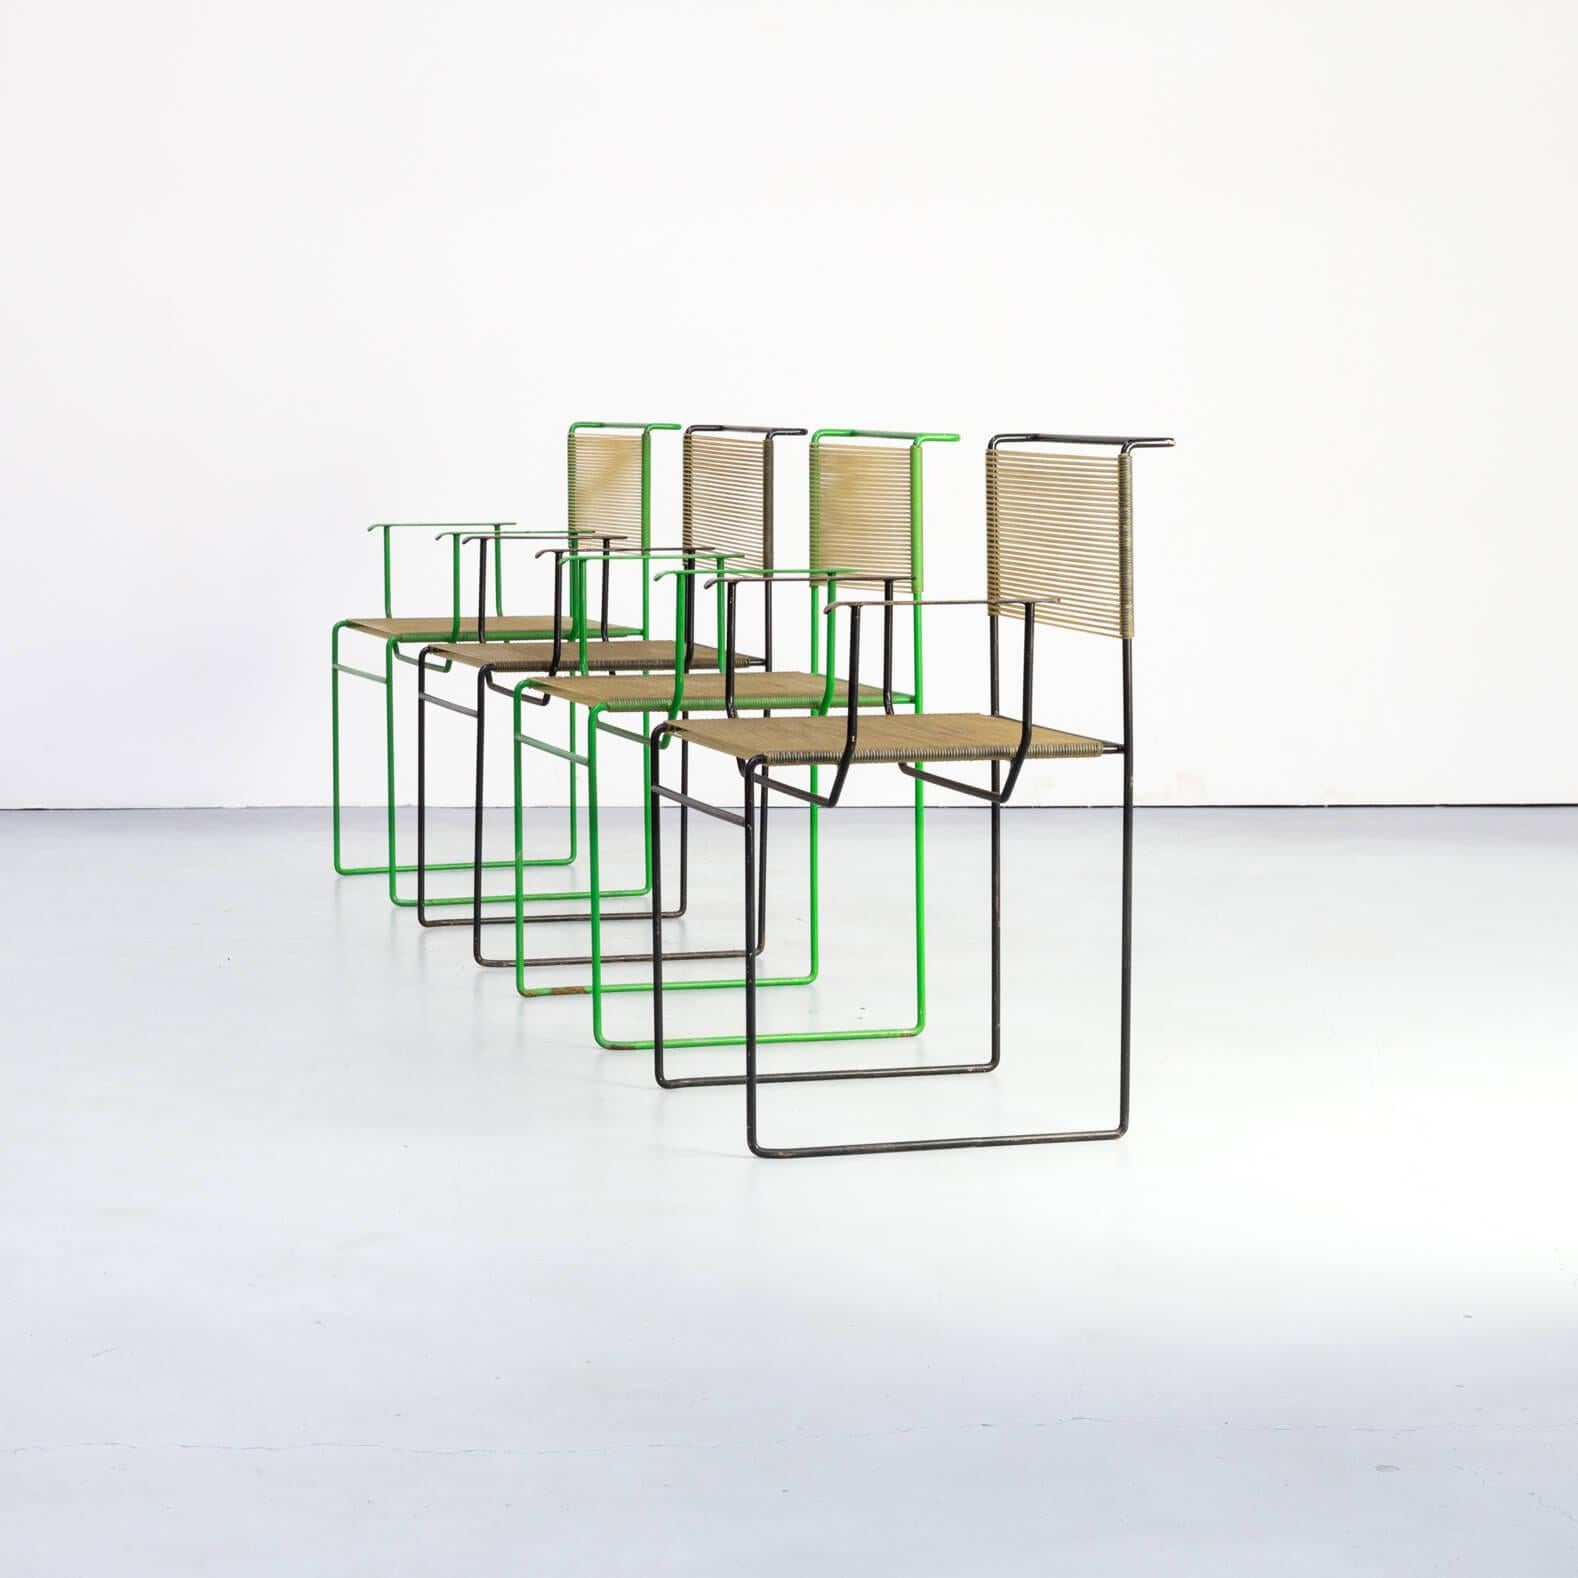 Set of two green and two black lacquered steel ‘spaghetti’ steel chairs designed by Giandomenico Belotti for Fly Line in the 1970s. First edition chairs.
Giandomenico Belotti (1922-2004) after graduating in architecture from the University of